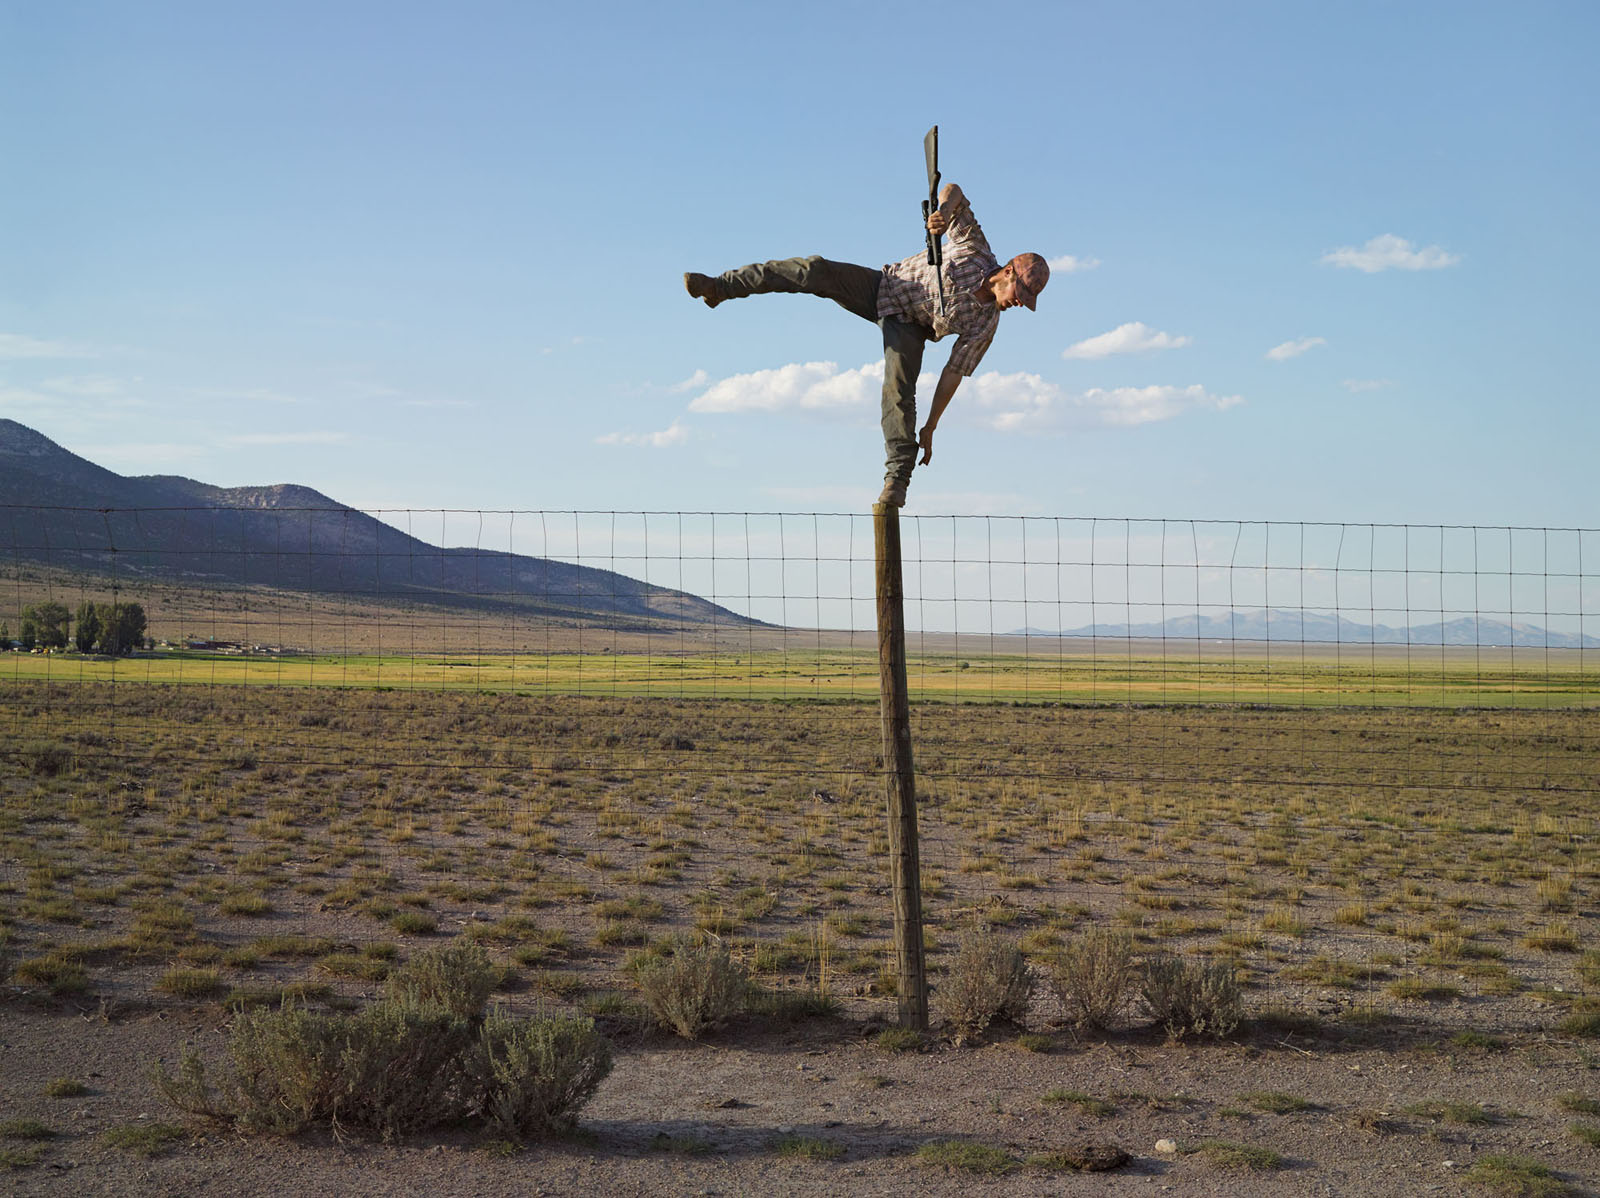 These Photos Are A Side Of The American West You’ve Never Seen Before